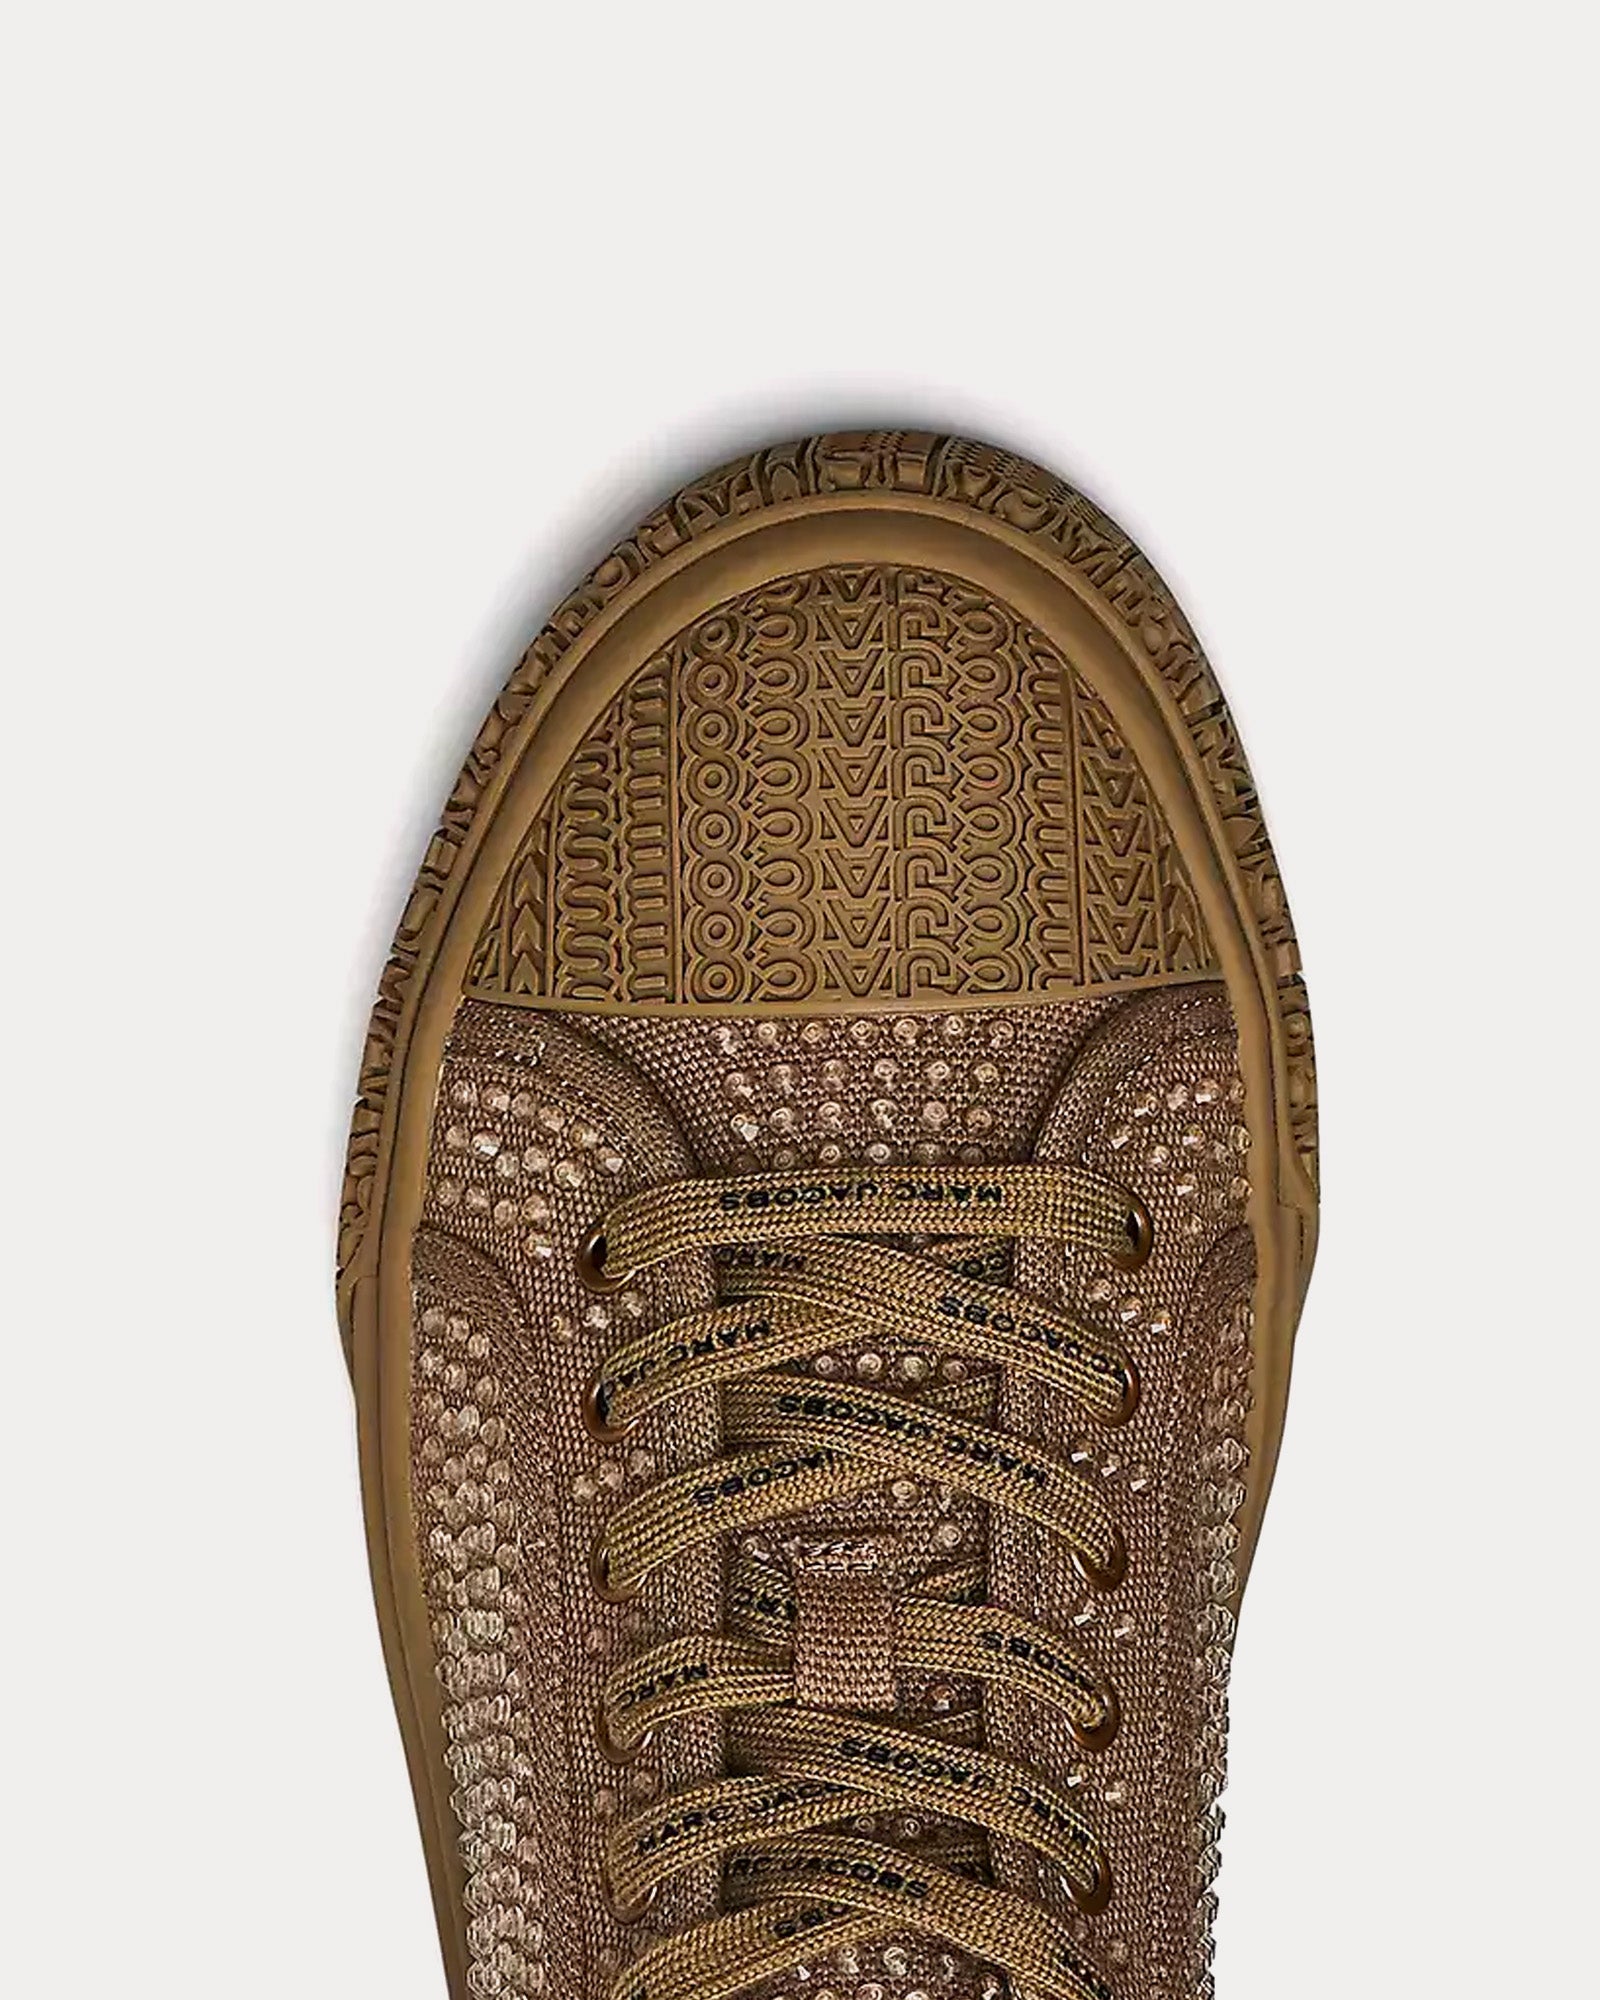 Marc Jacobs - The Crystal Canvas Earth Brown Low Top Sneakers